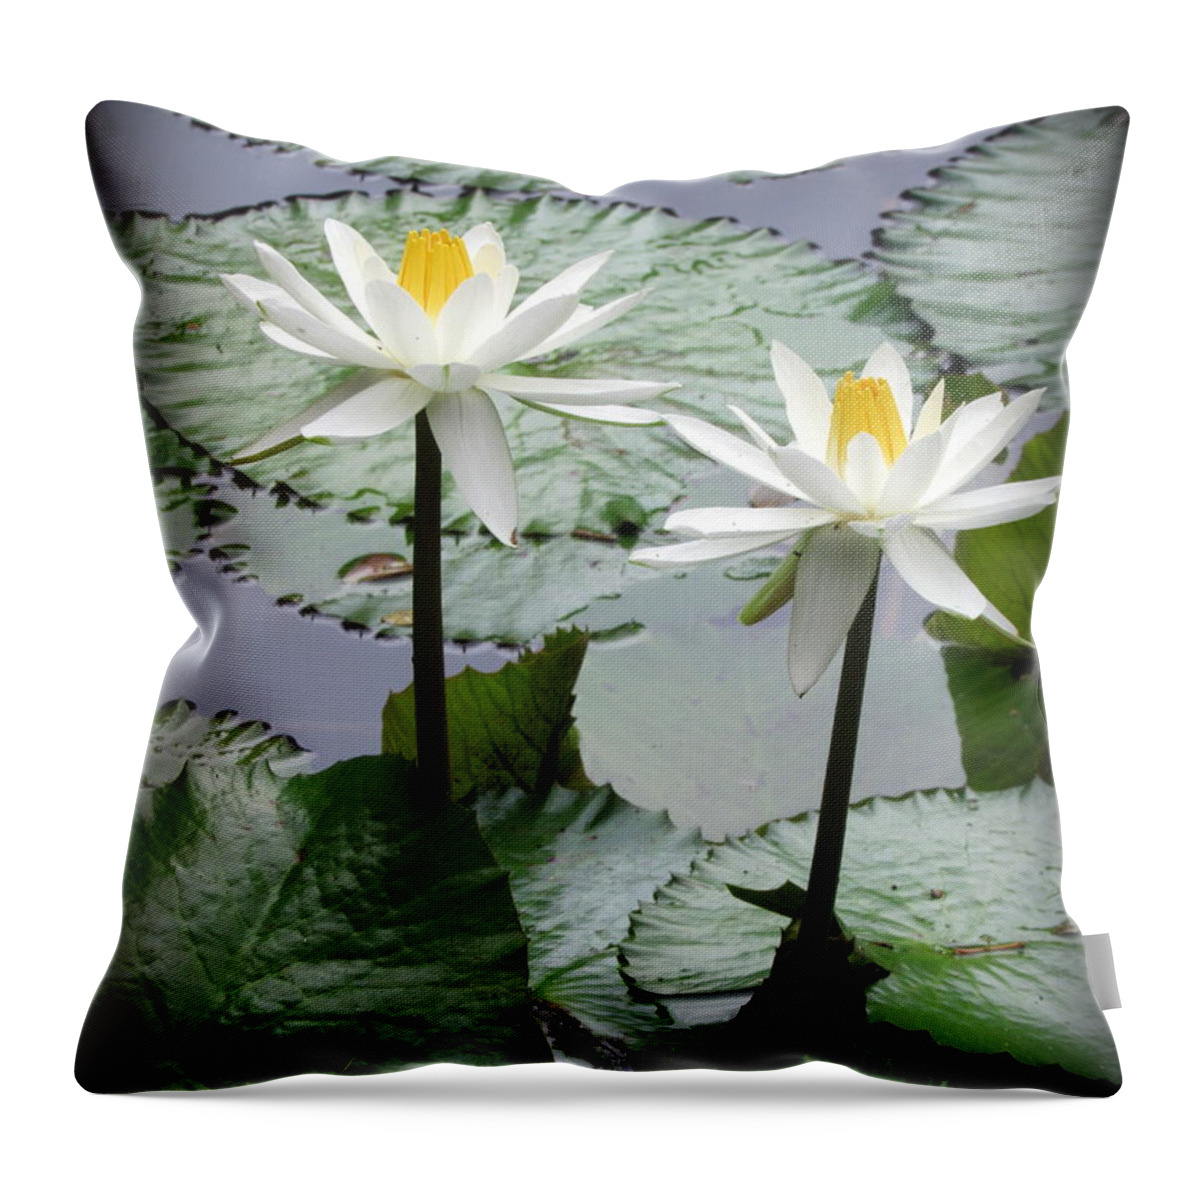 Oahu Throw Pillow featuring the photograph Water Lily on Oahu by Joy Patzner